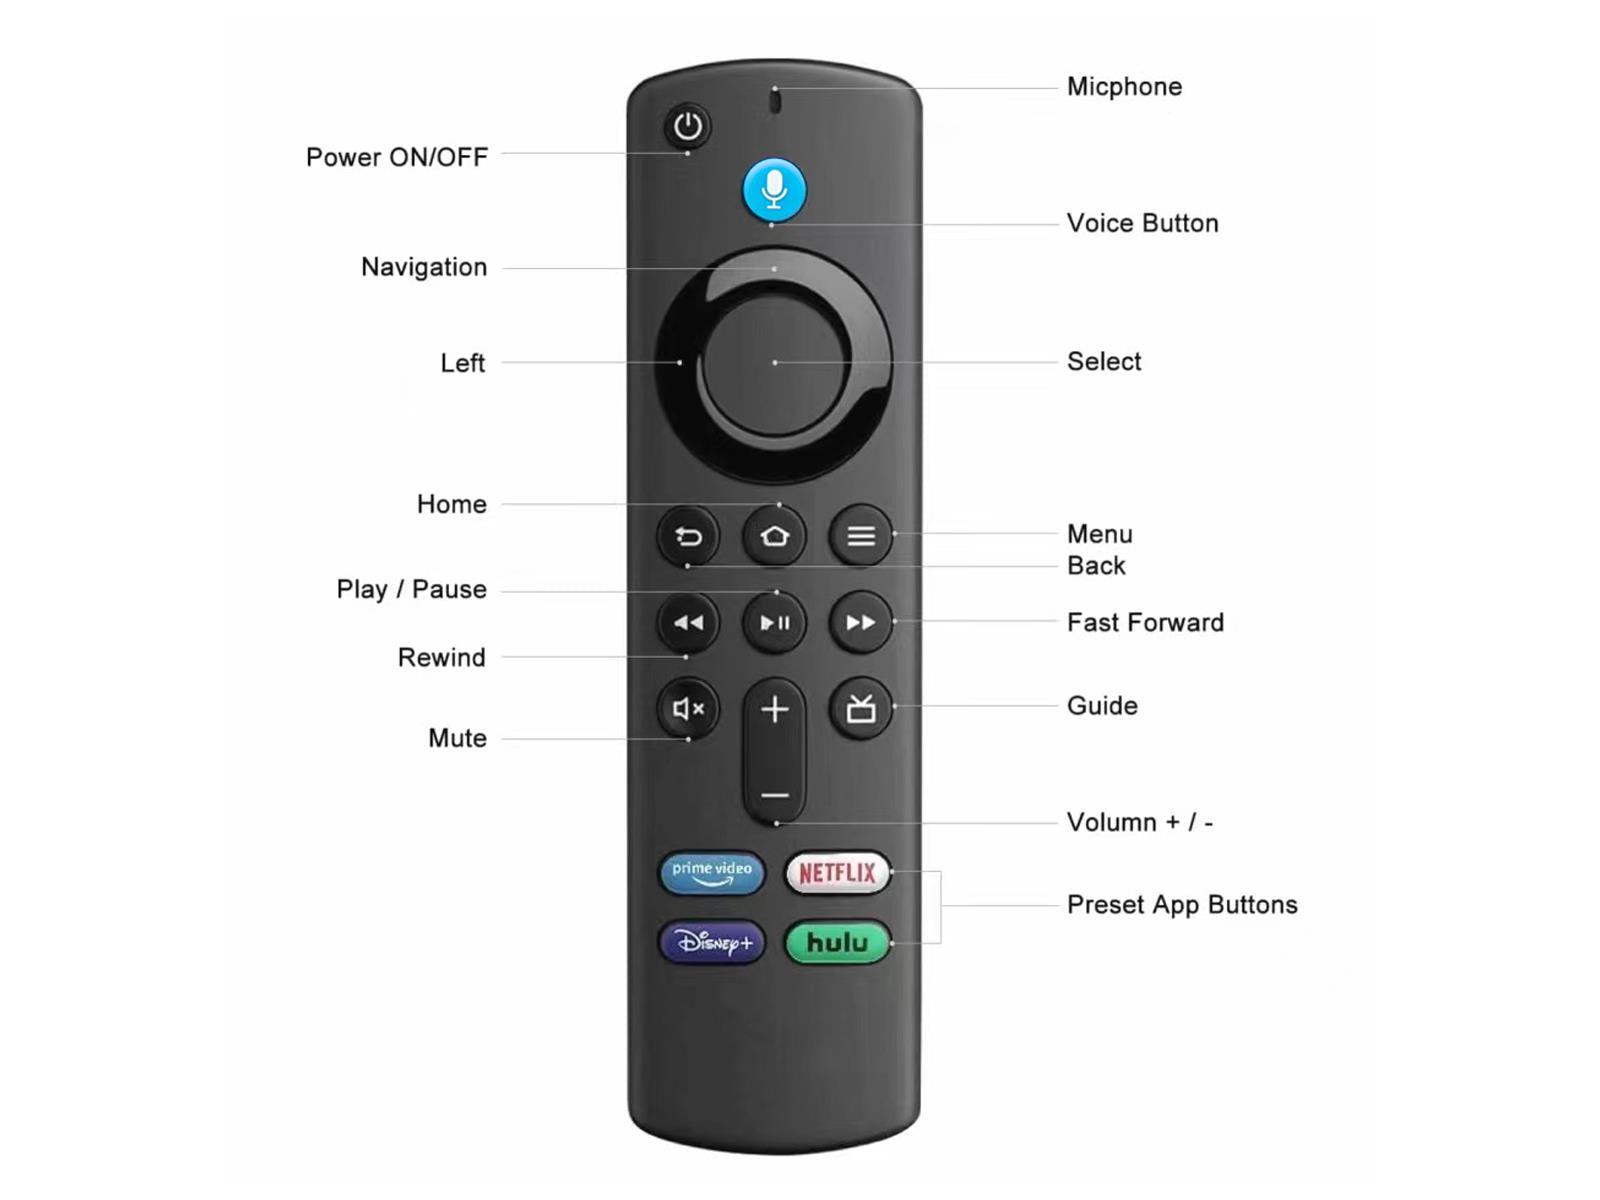 Fire TV Stick (3rd Gen) with Alexa Voice Remote (Includes TV  Controls)